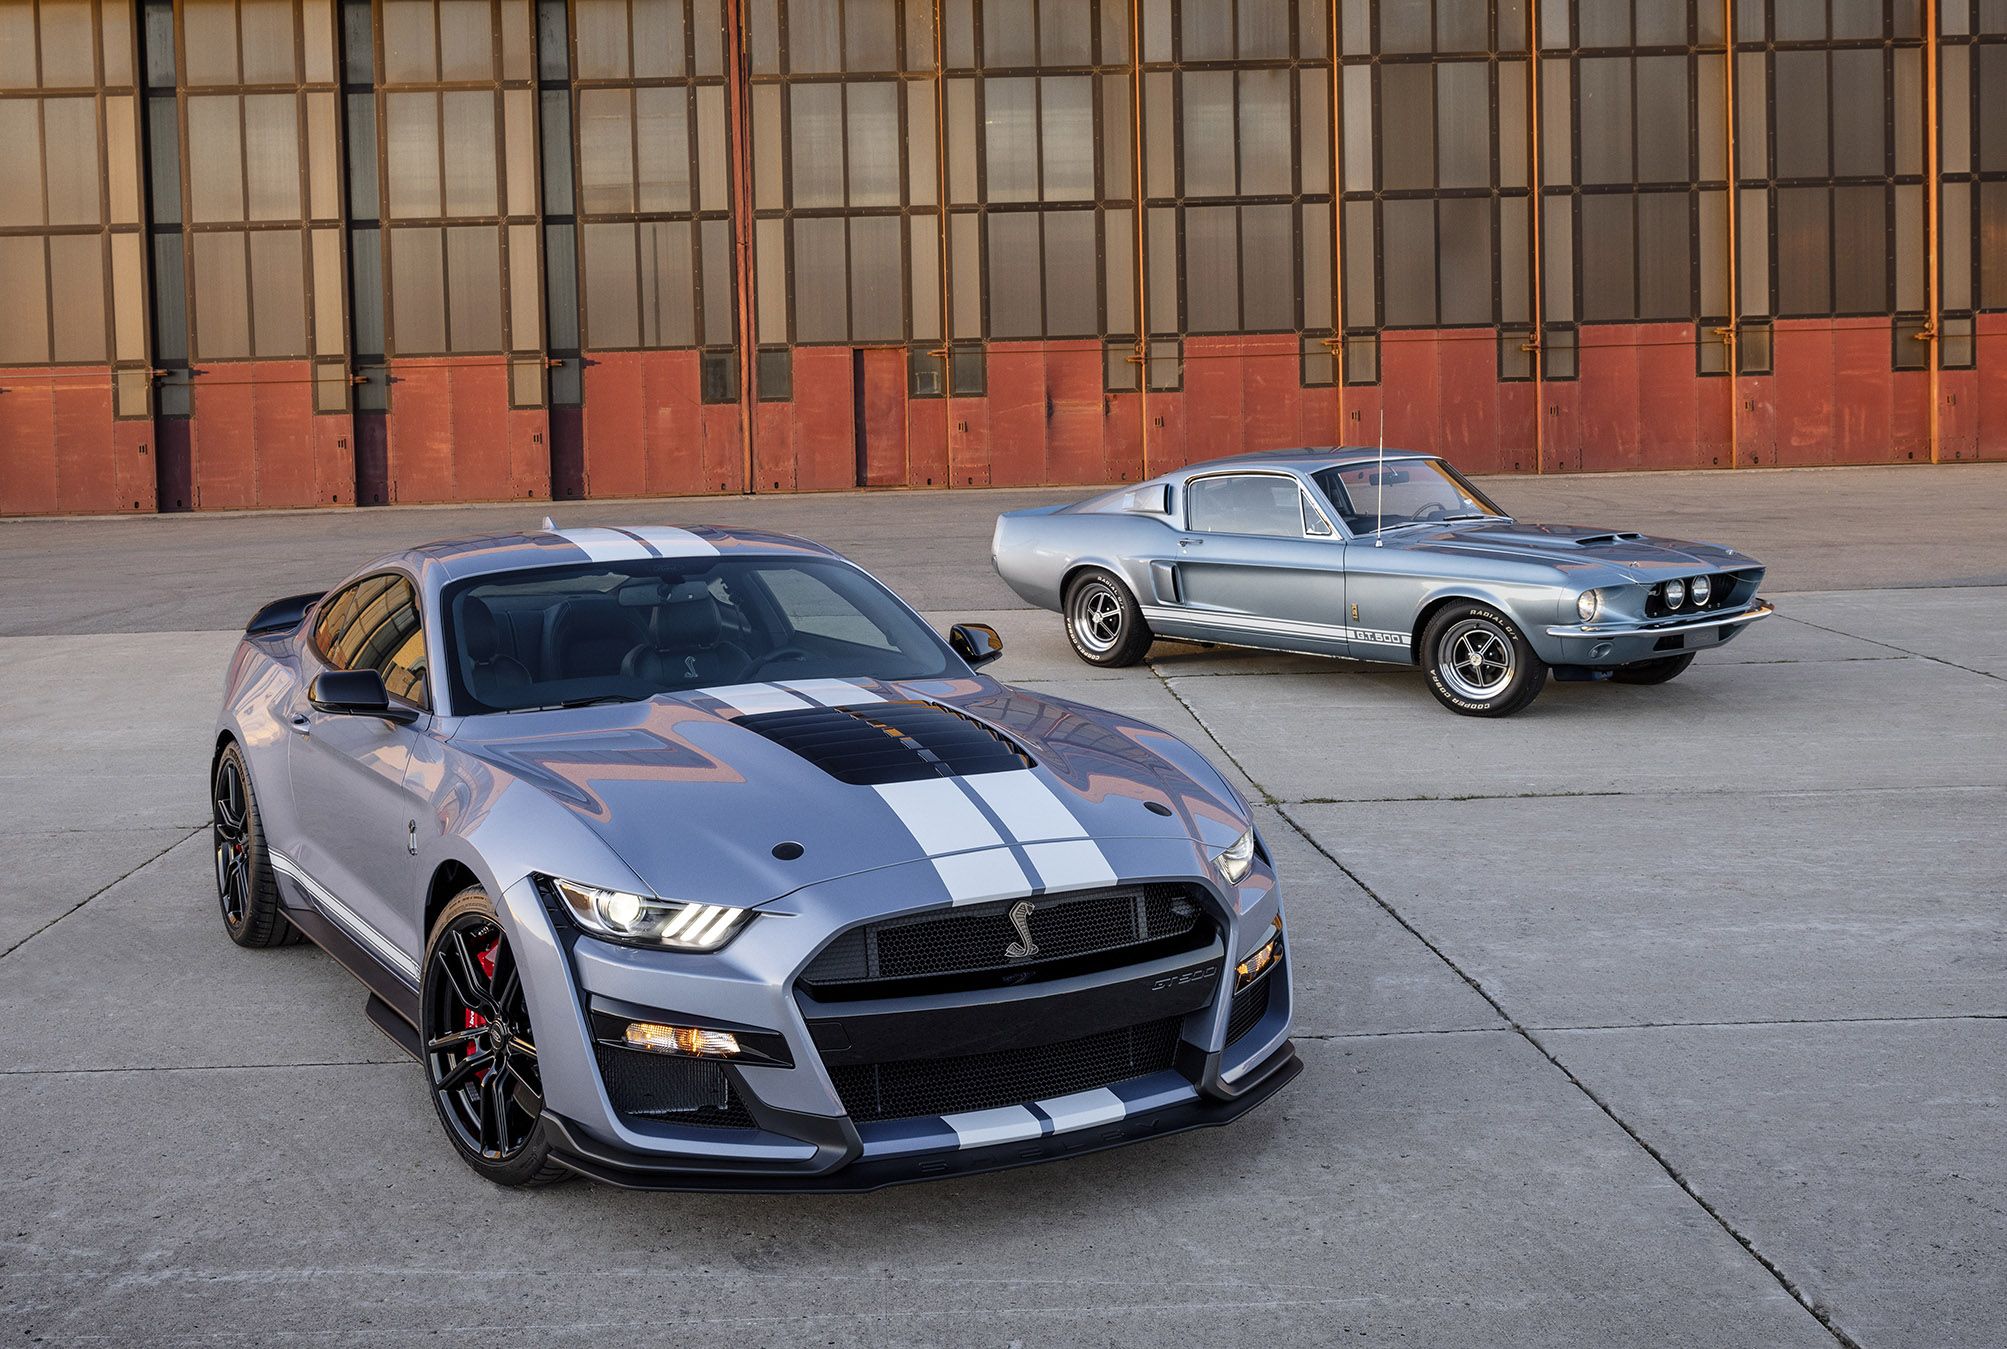 2022 Mustang Shelby GT500 Heritage Edition Image Gallery